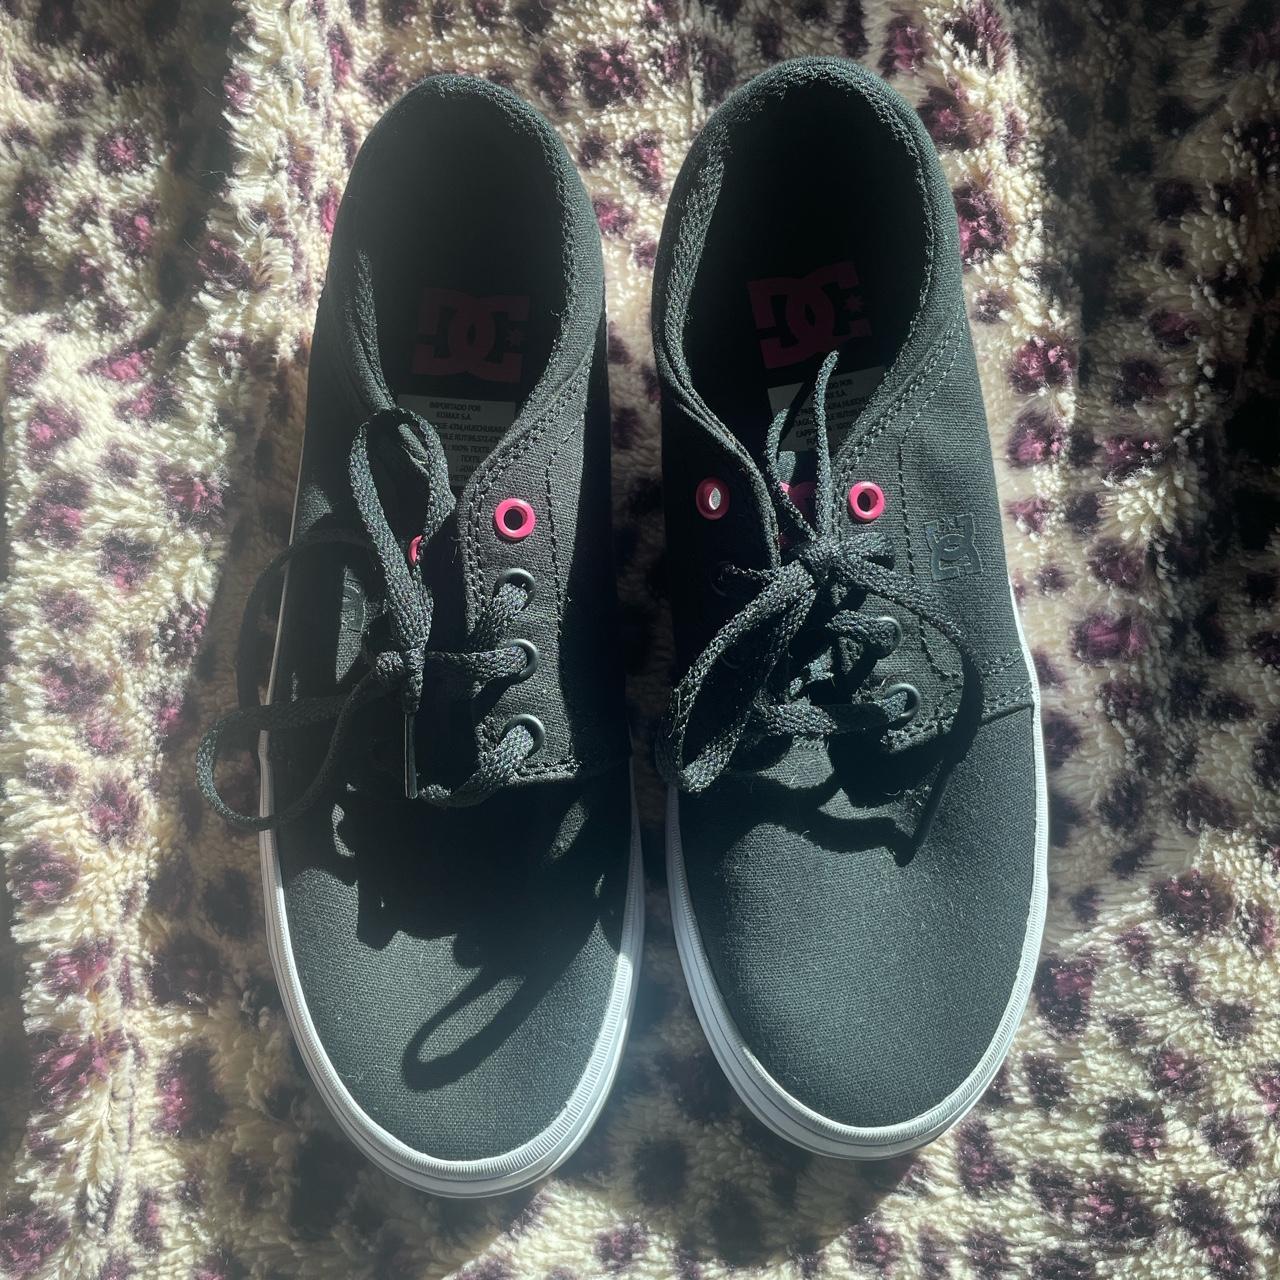 DC Shoes Women's Black and Pink Trainers | Depop